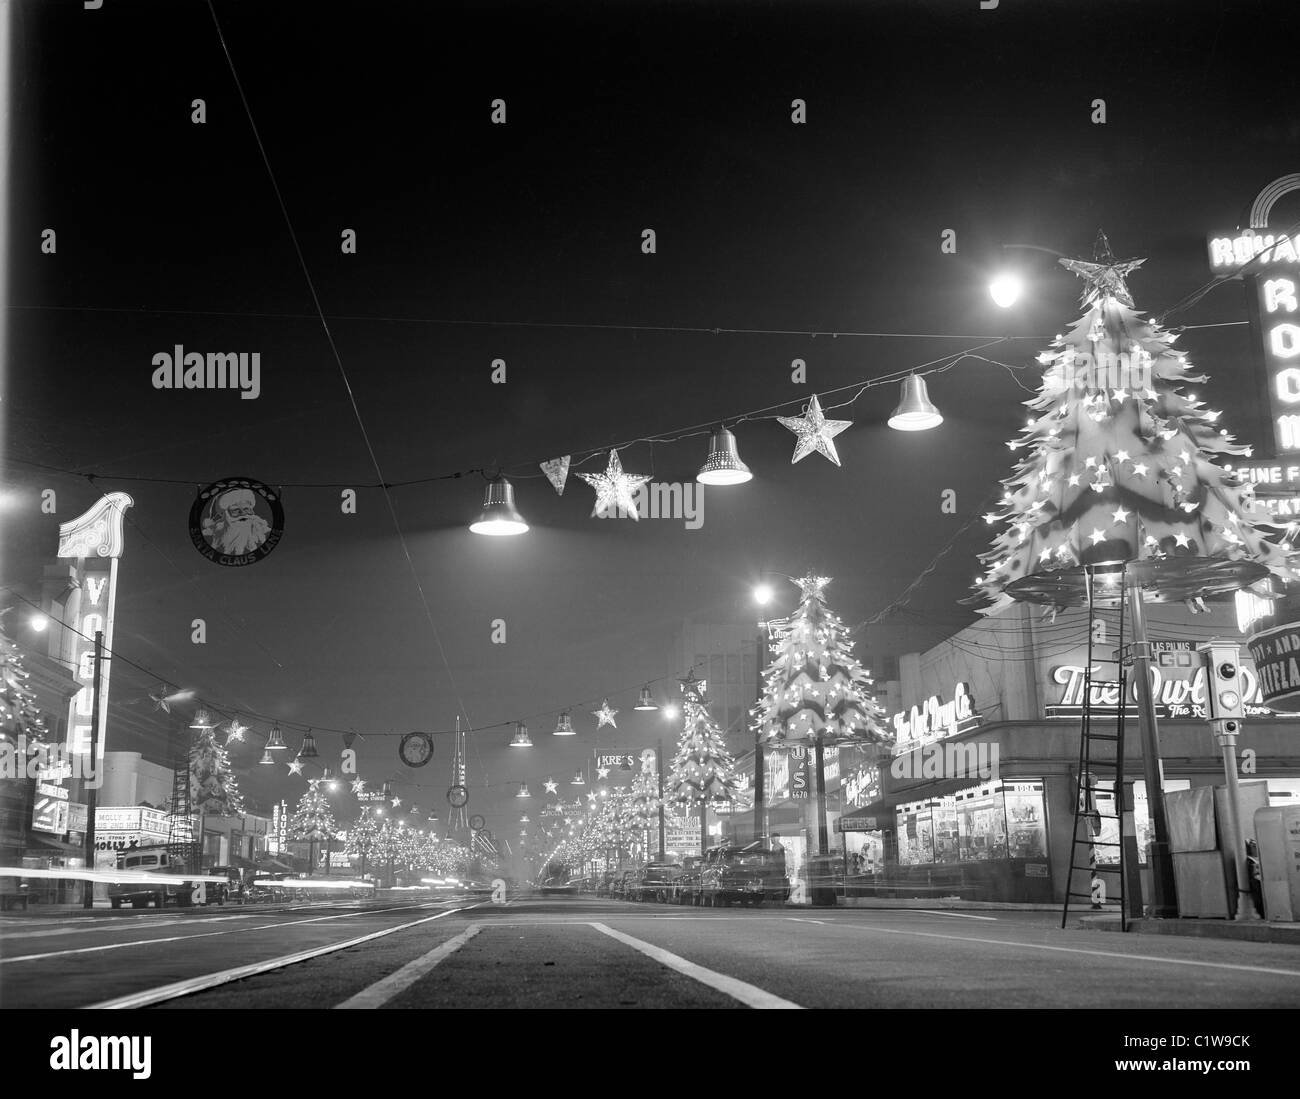 USA, California, Los Angeles, Hollywood, Hollywood Boulevard at night looking East showing Christmas lights Stock Photo